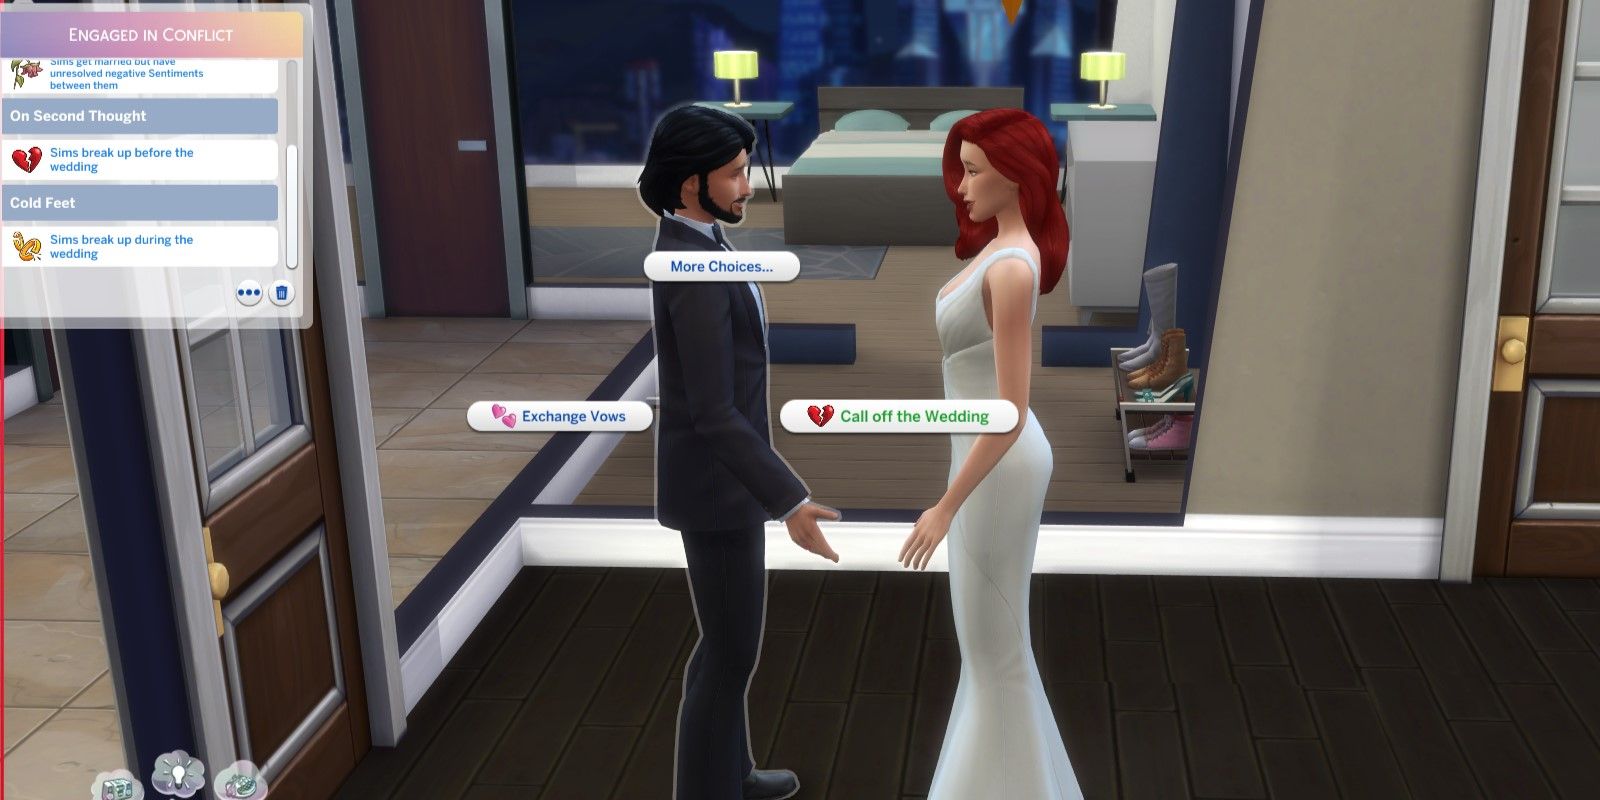 The Sims 4 character is given the choice to call off the wedding during the ceremony to complete the Engaged In Conflict scenario.